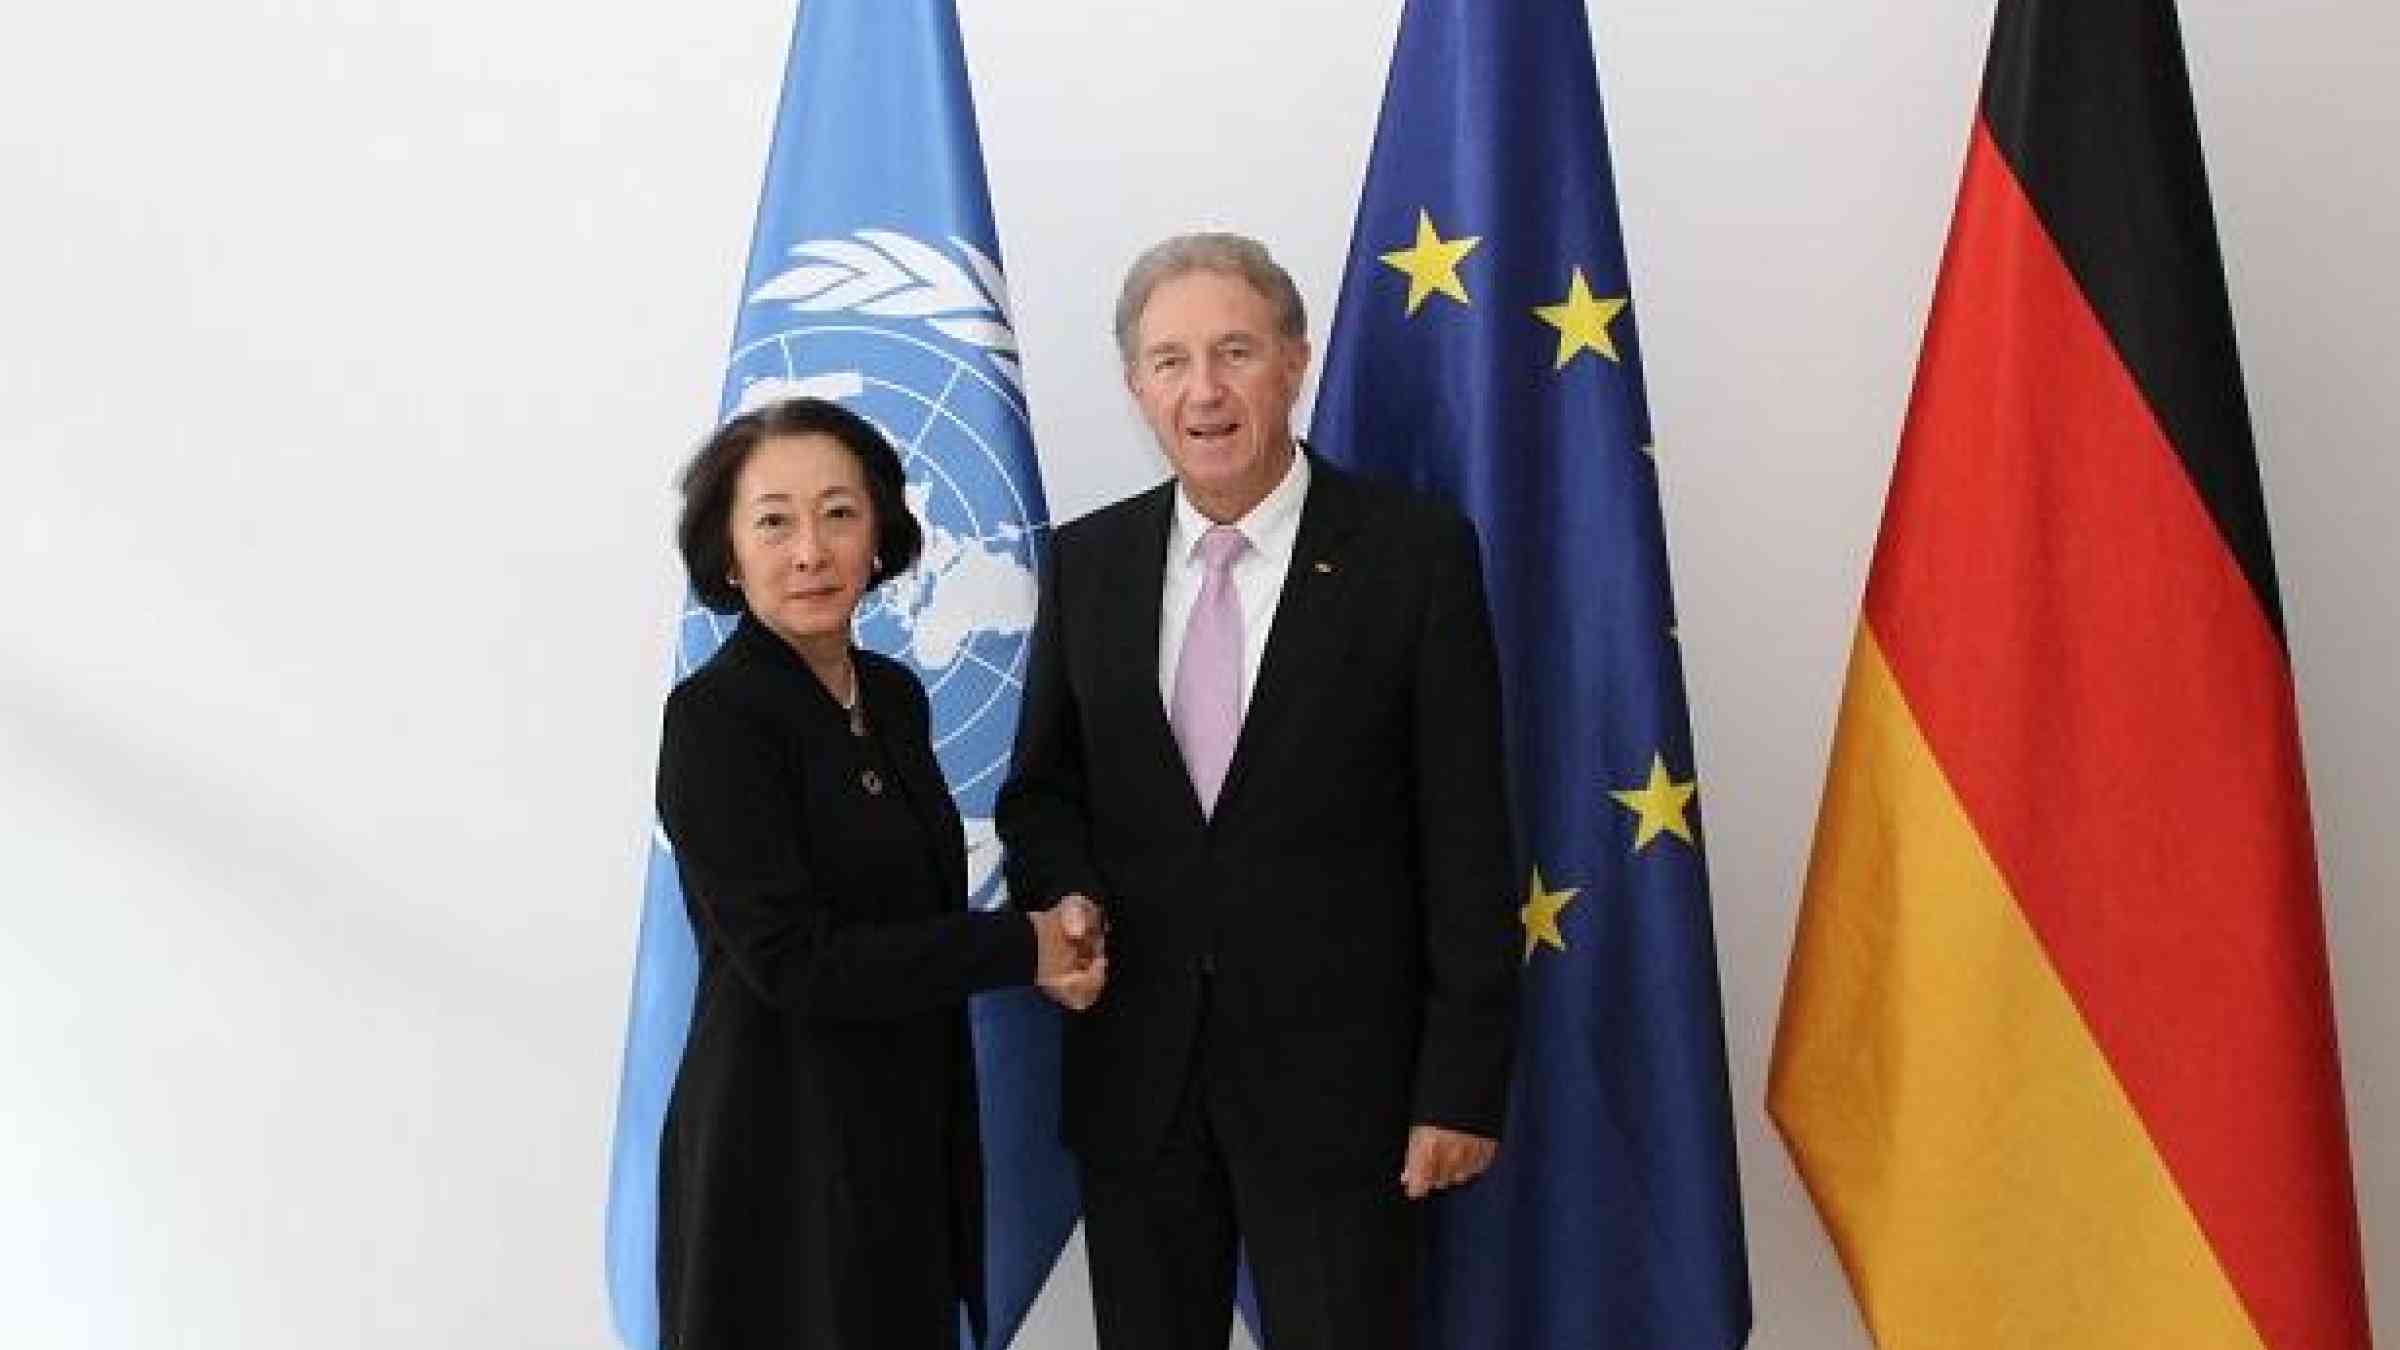 Parliamentary State Secretary to the Federal Minister for Economic Cooperation and Development, Norbert Barthle, and Mami Mizutori, UN Special Representative of the SG for Disaster Risk Reduction (c)Federal Minister for Economic Cooperation and Development